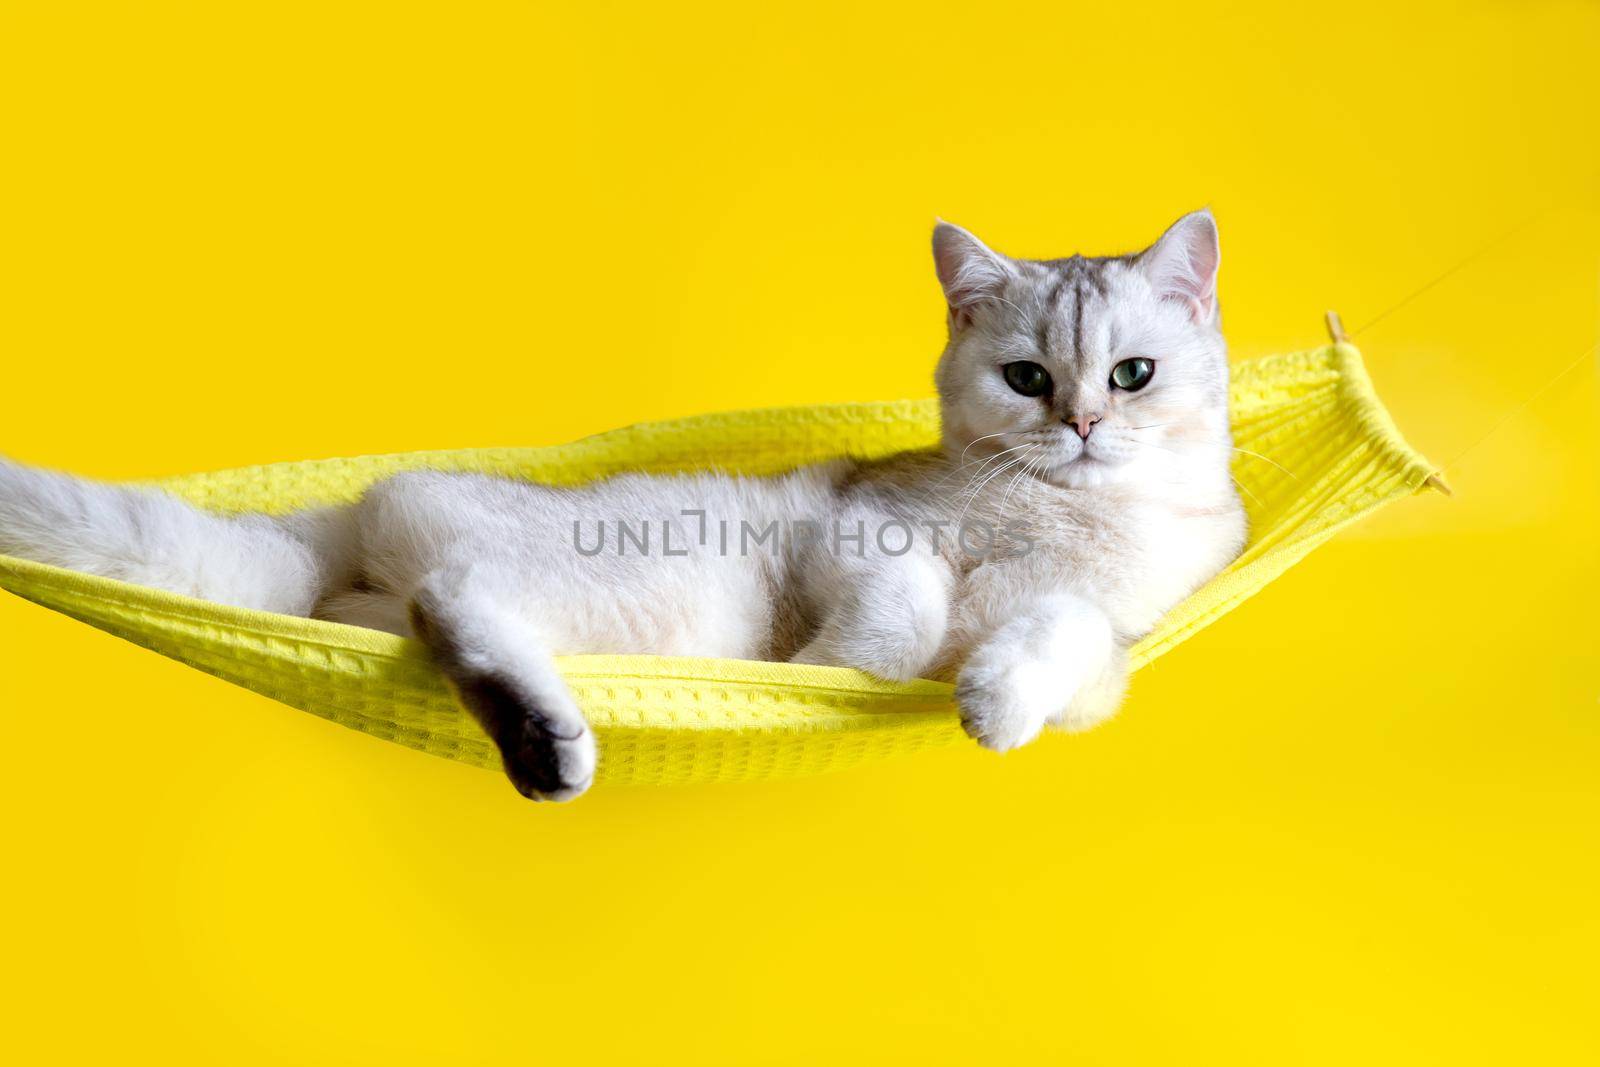 Adorable white cat lie on yellow hammock on yellow background by Zakharova